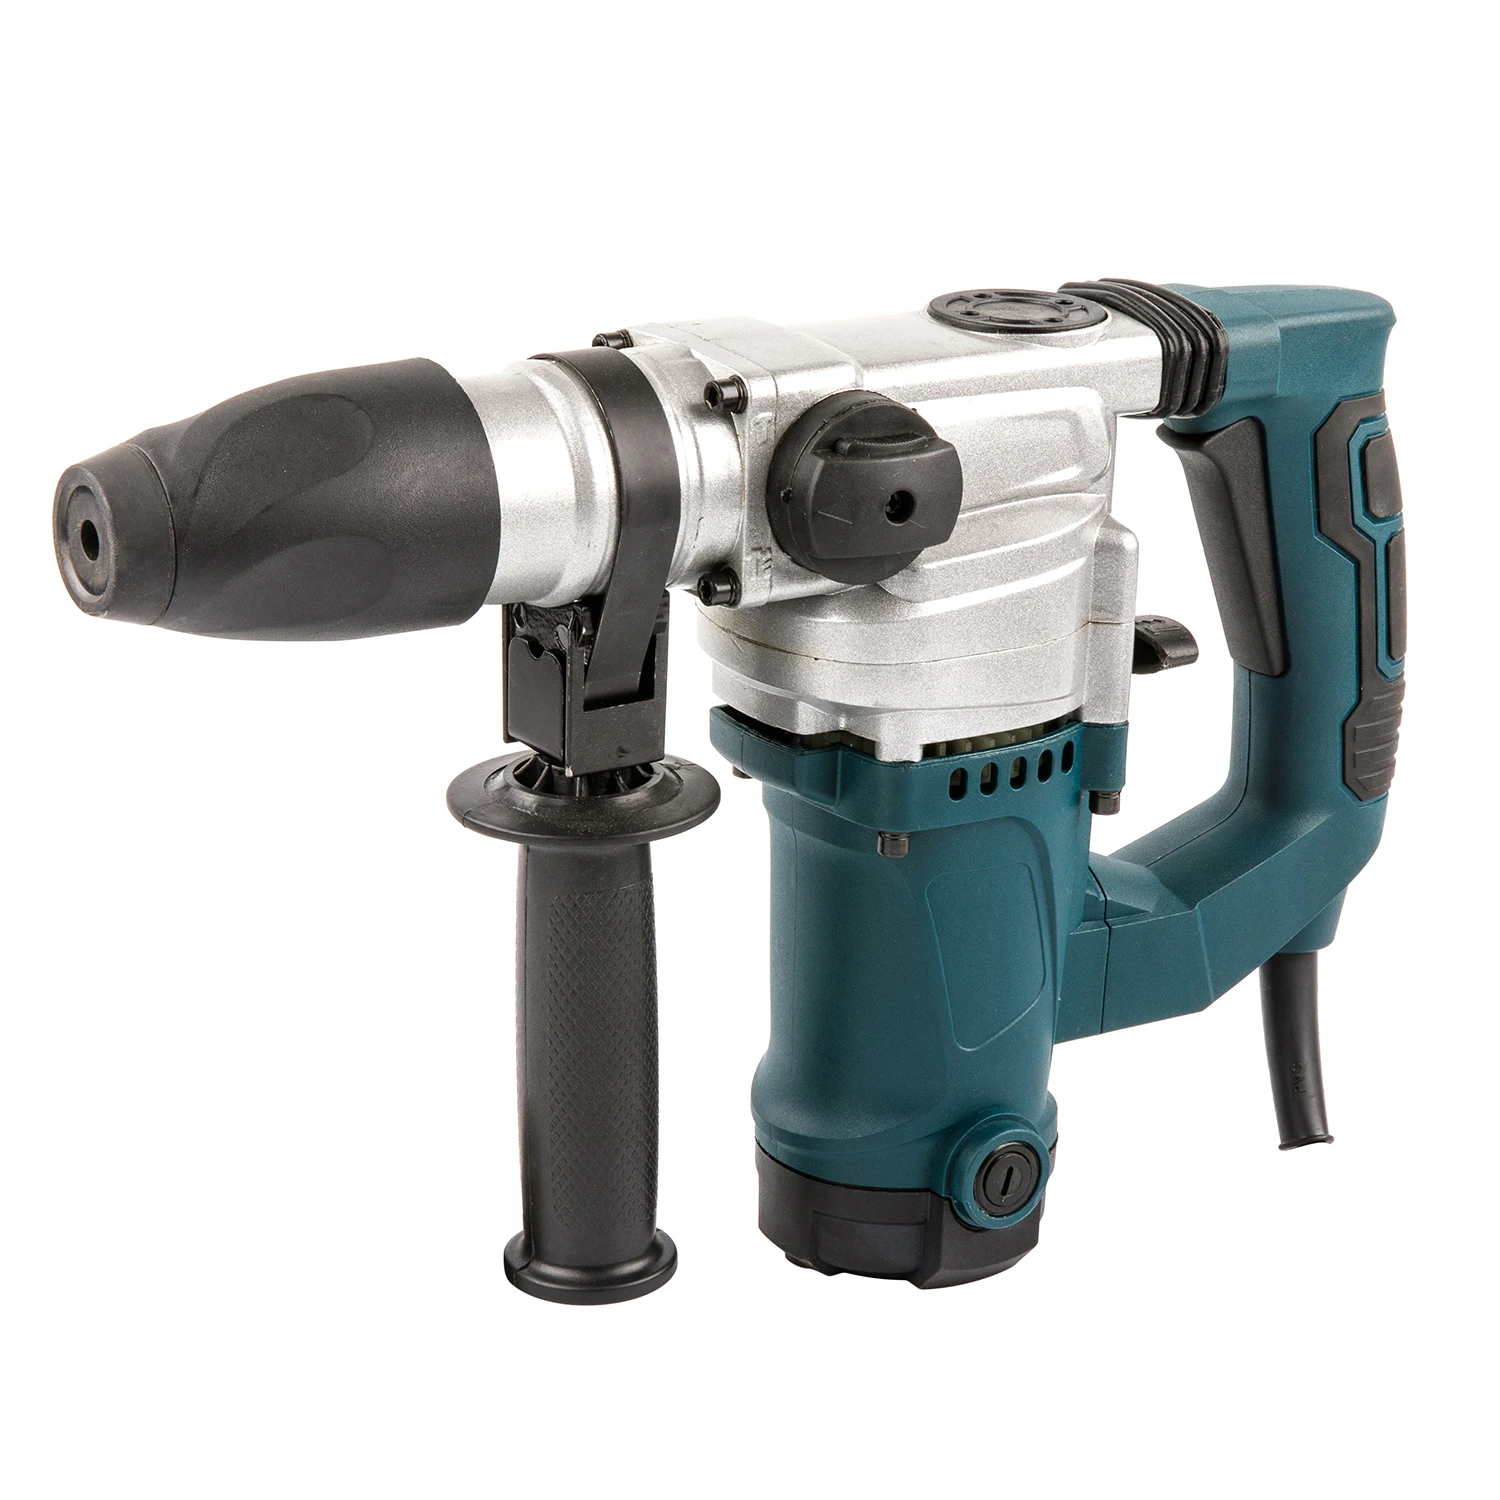 28mm rotary hammer 850w electric hammer